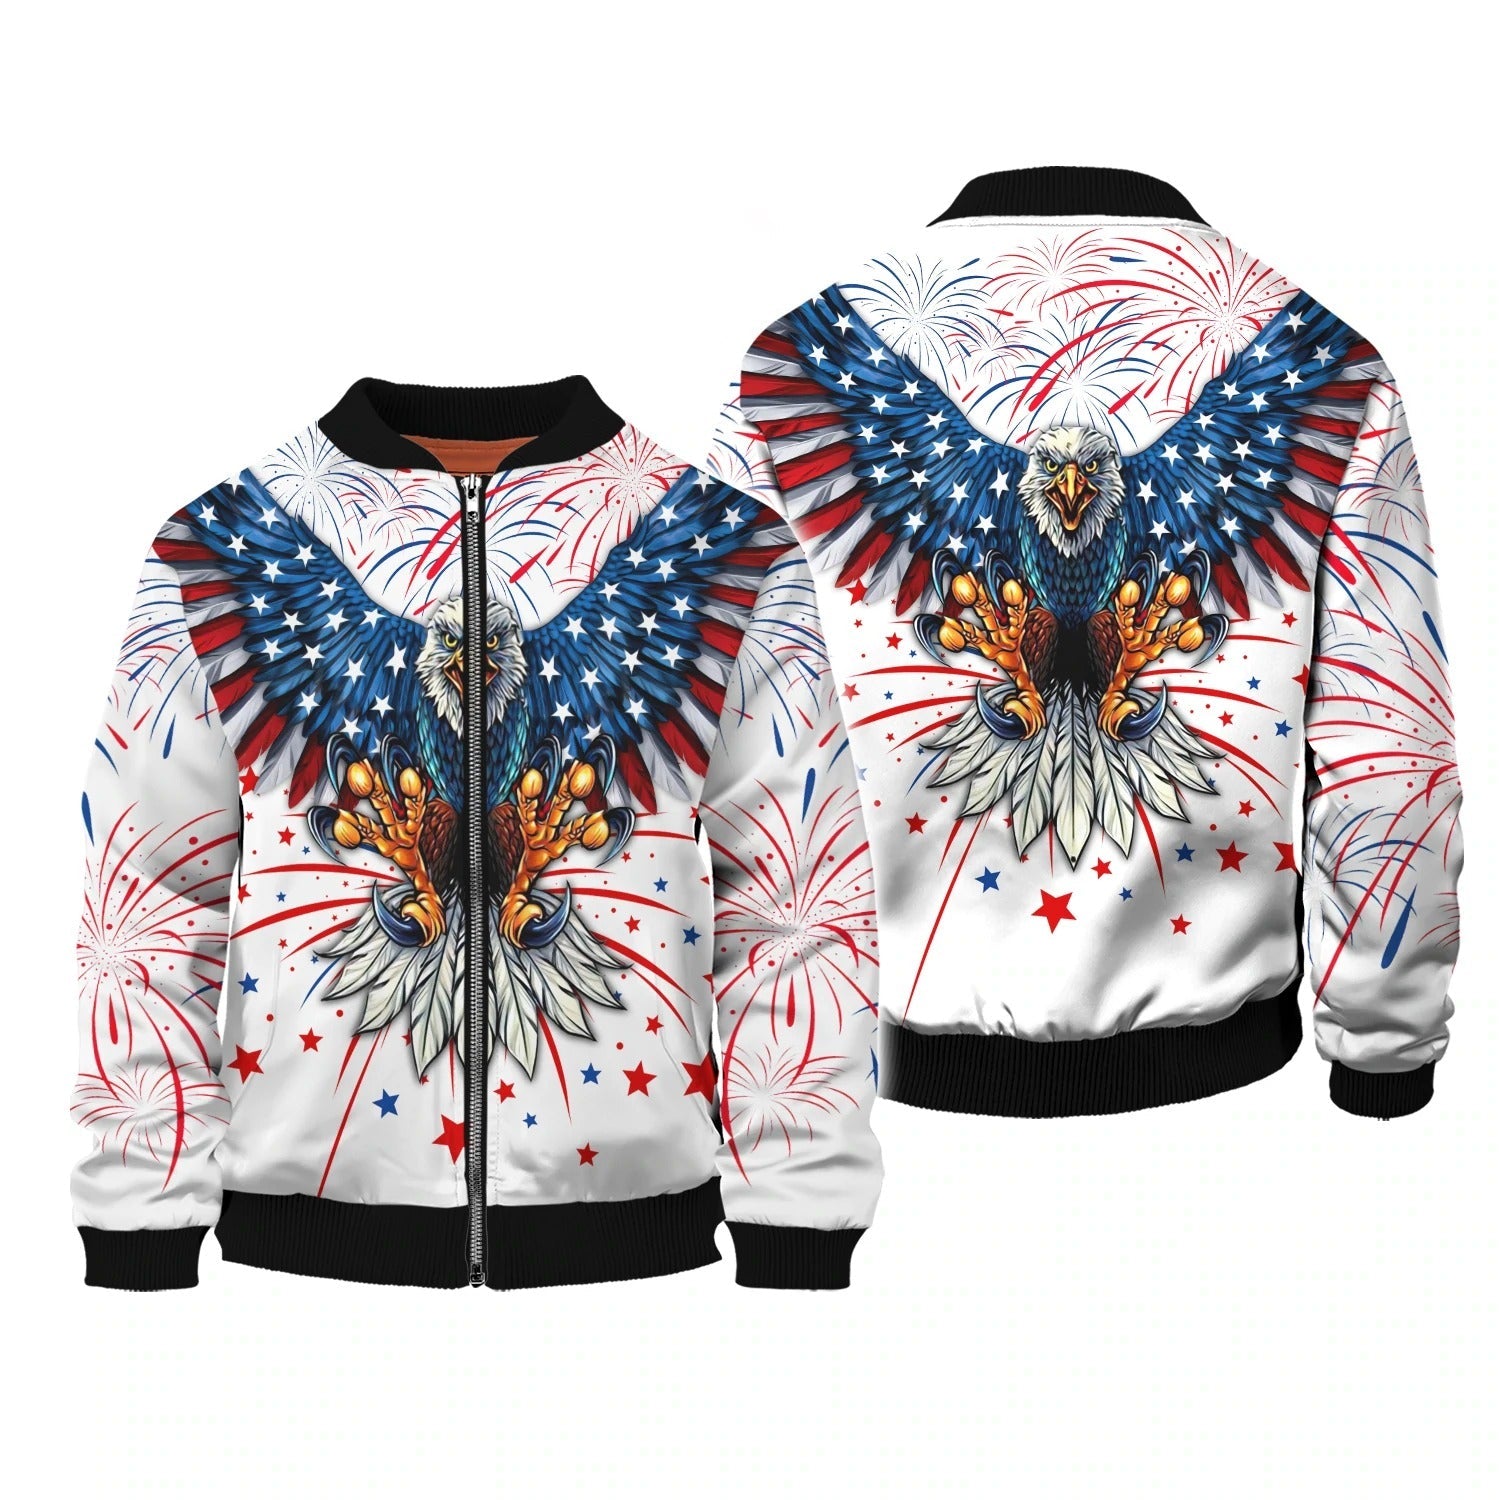 Independence Day Is Coming Ealge 3D All Over Printed T Shirt 3D Bomber Hoodie For 4Th July Pride American